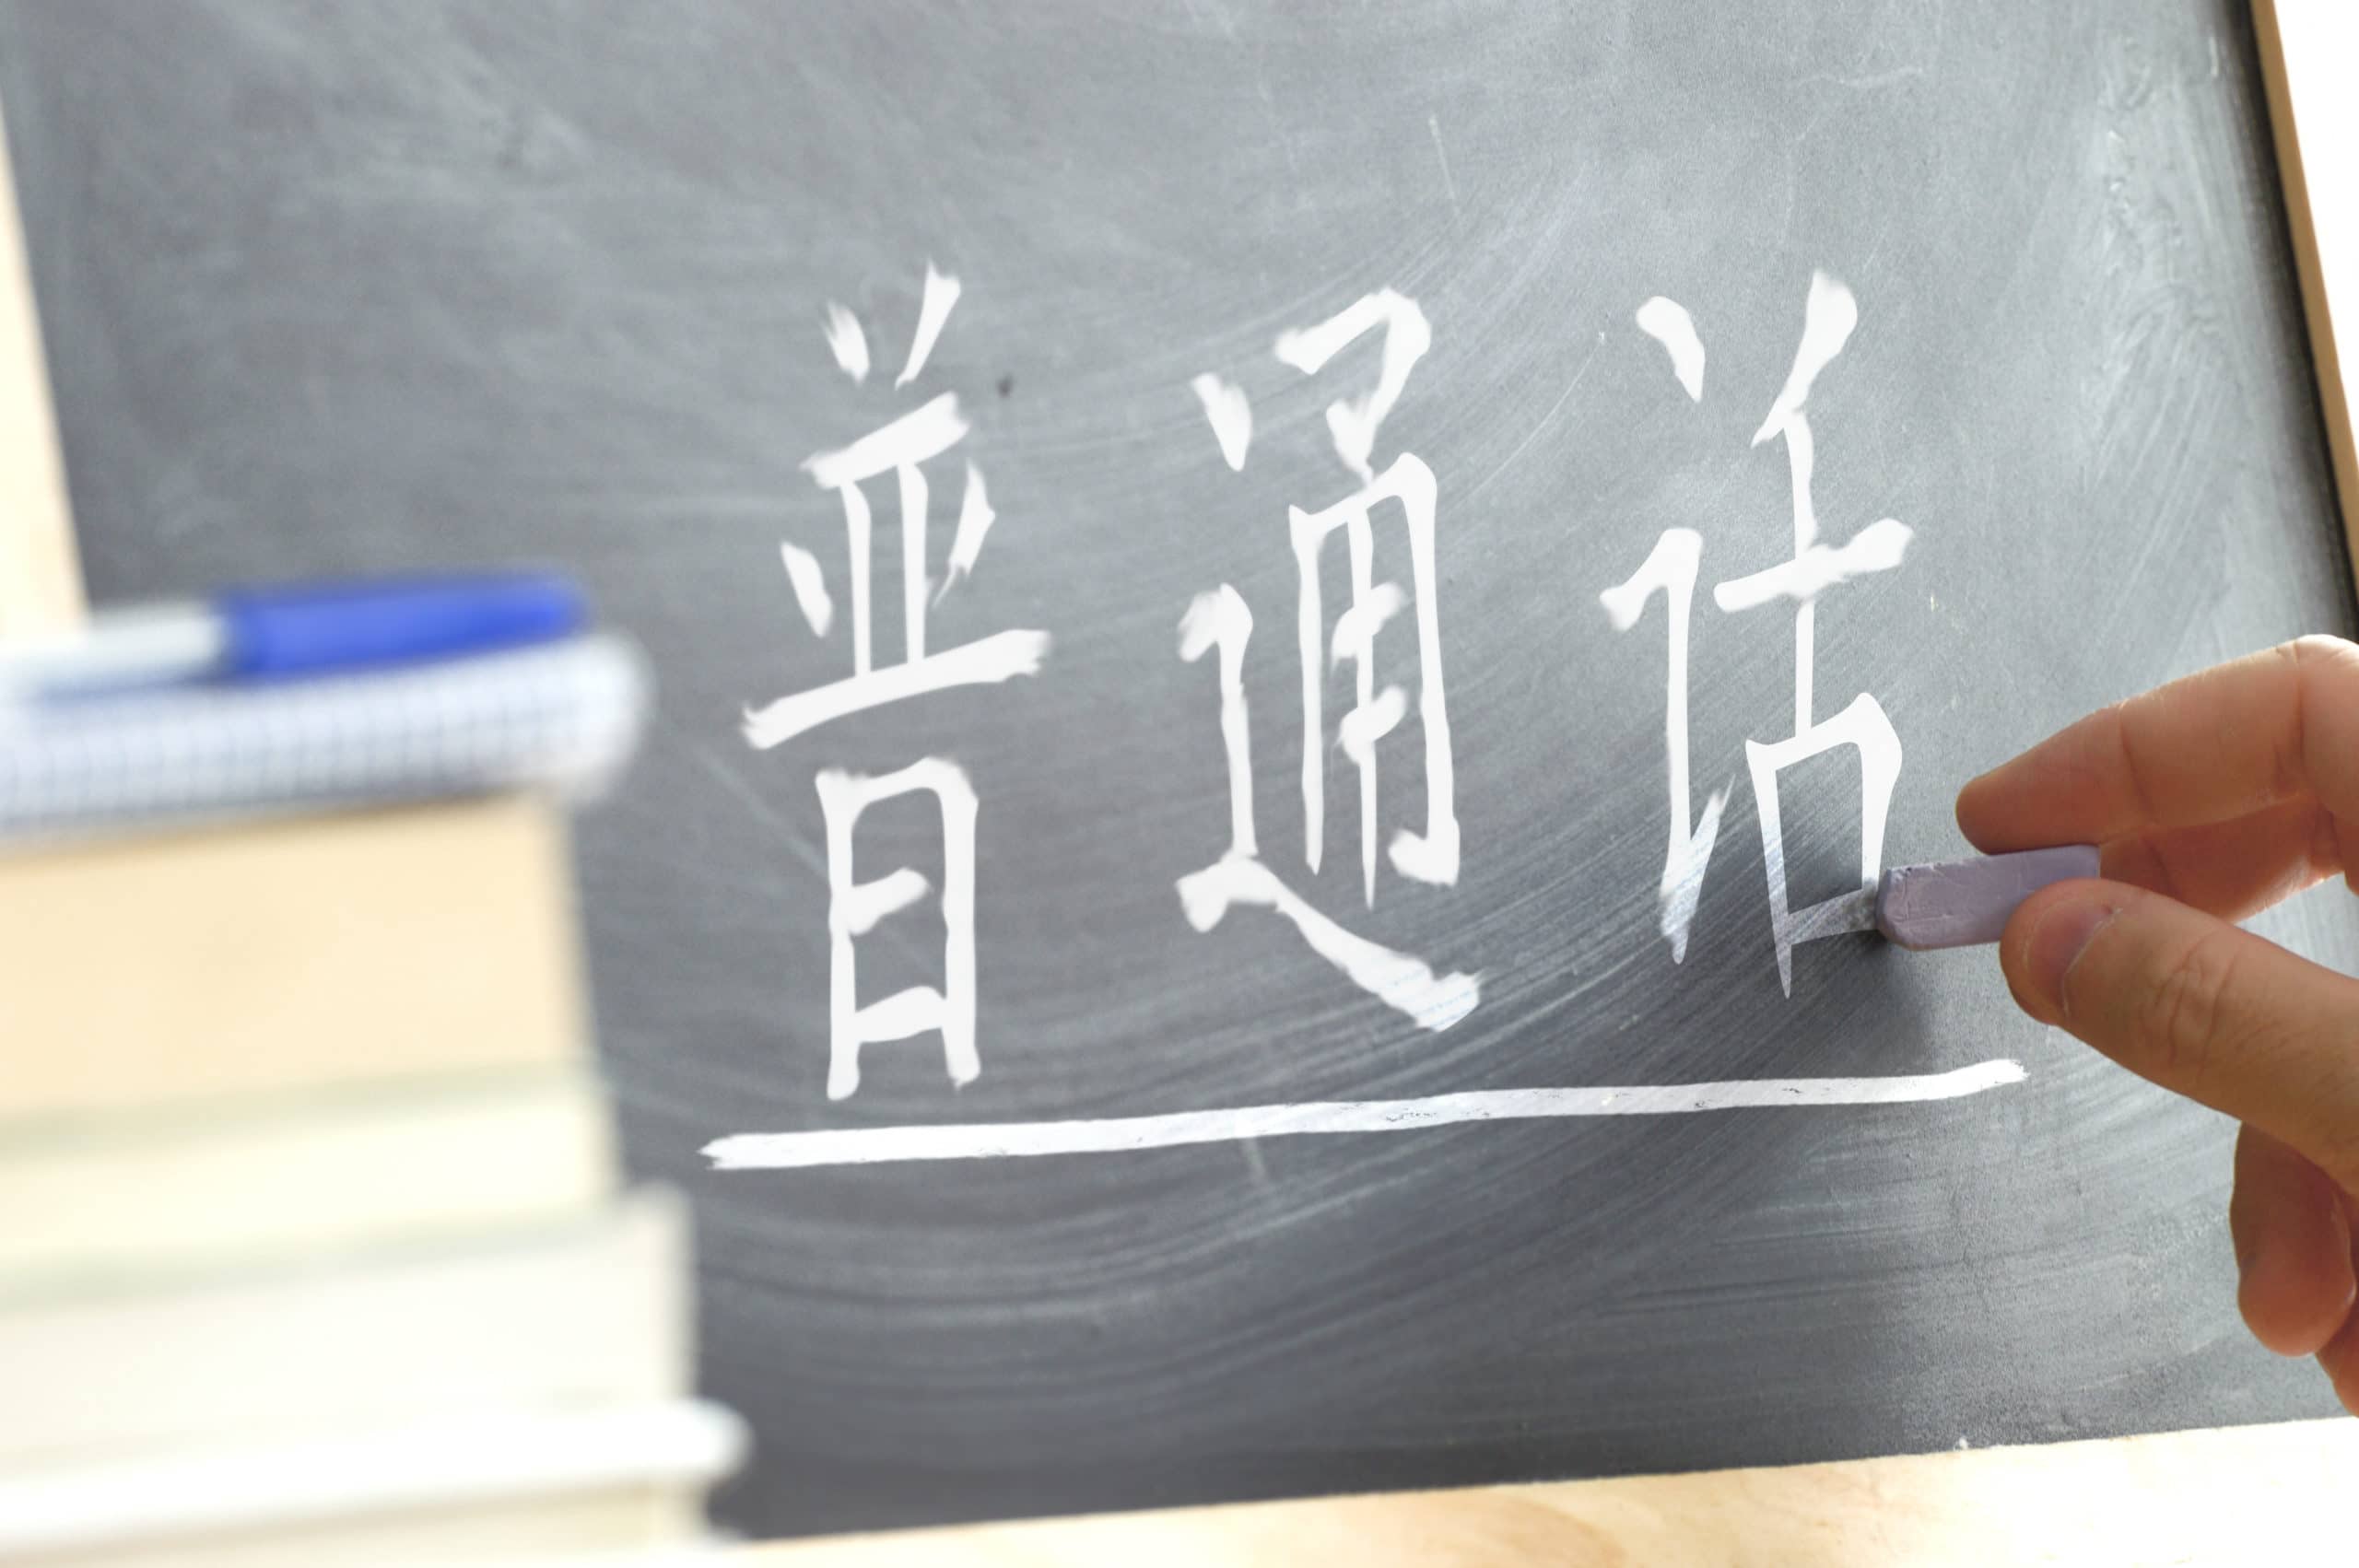 The Best TV Shows for Learning Mandarin at Each Level